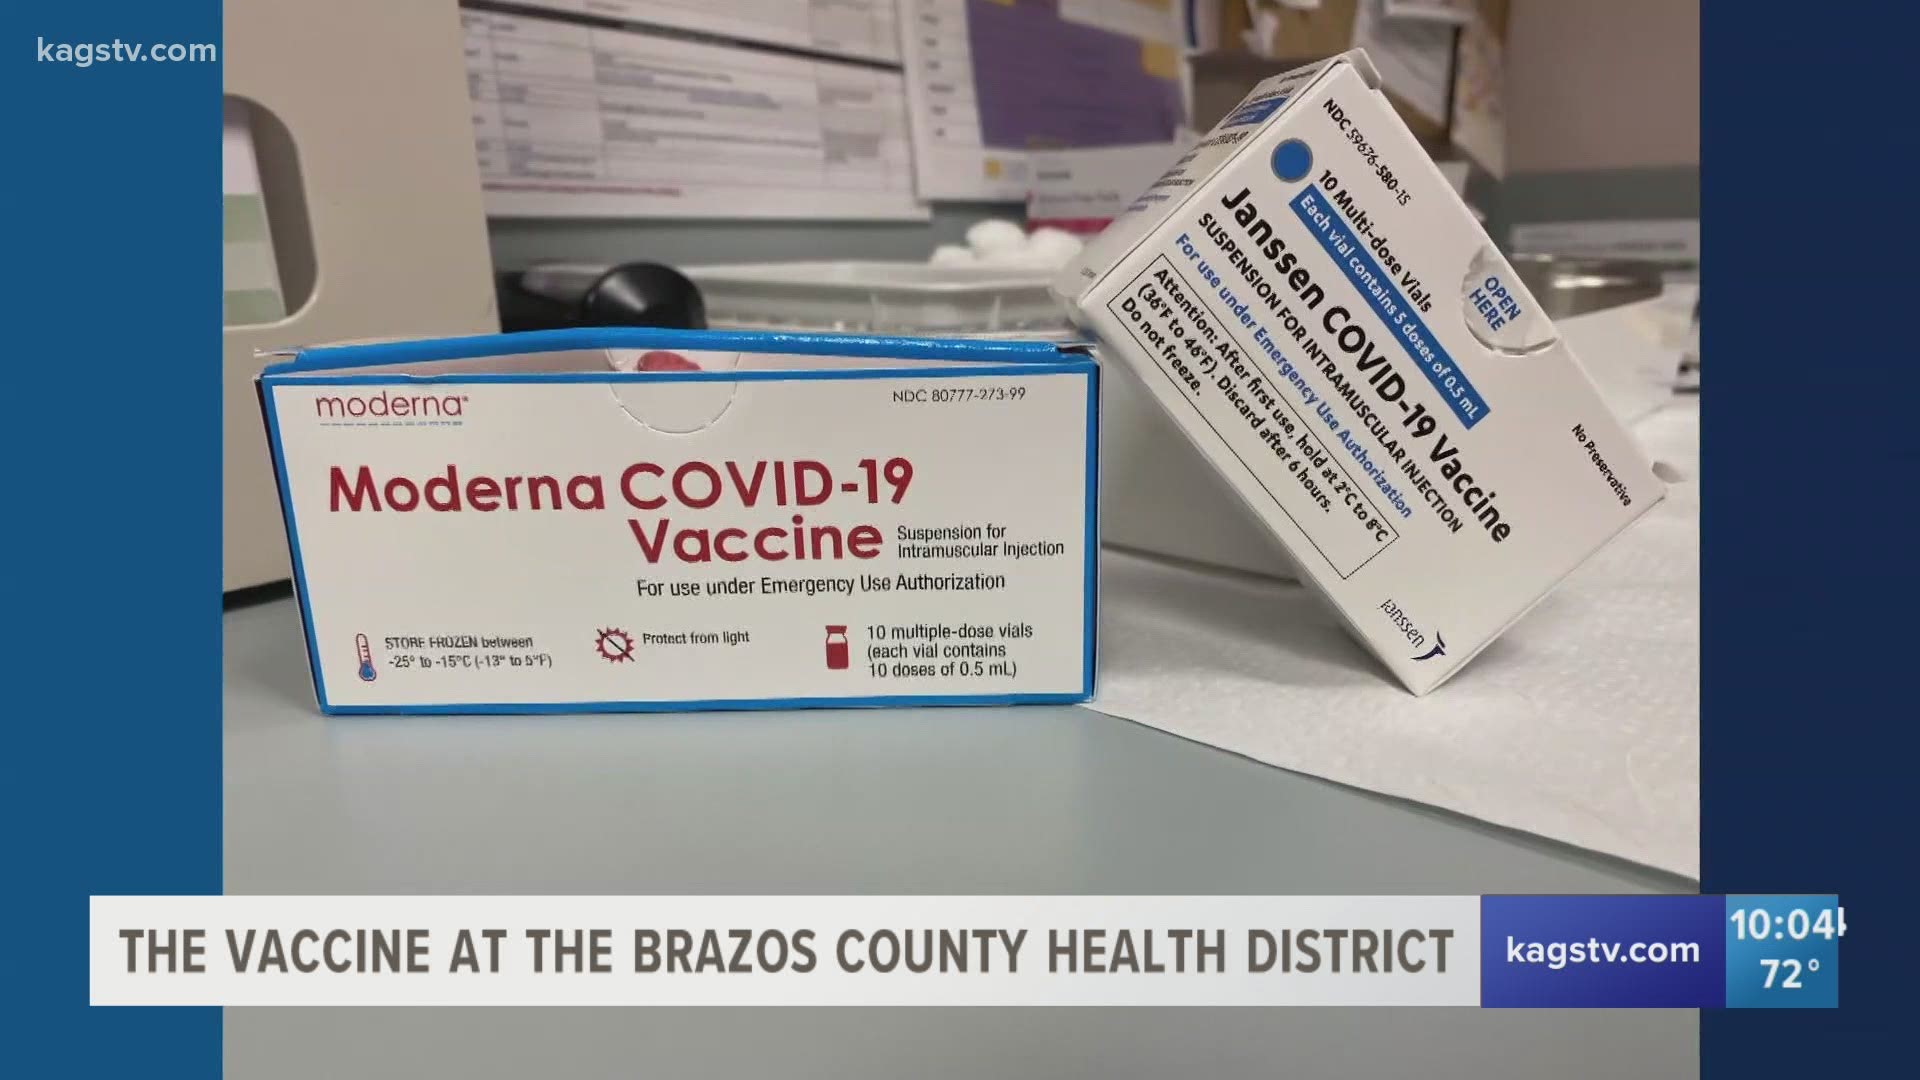 The Health District is set to administer 300 doses of the Johnson & Johnson vaccine this week.